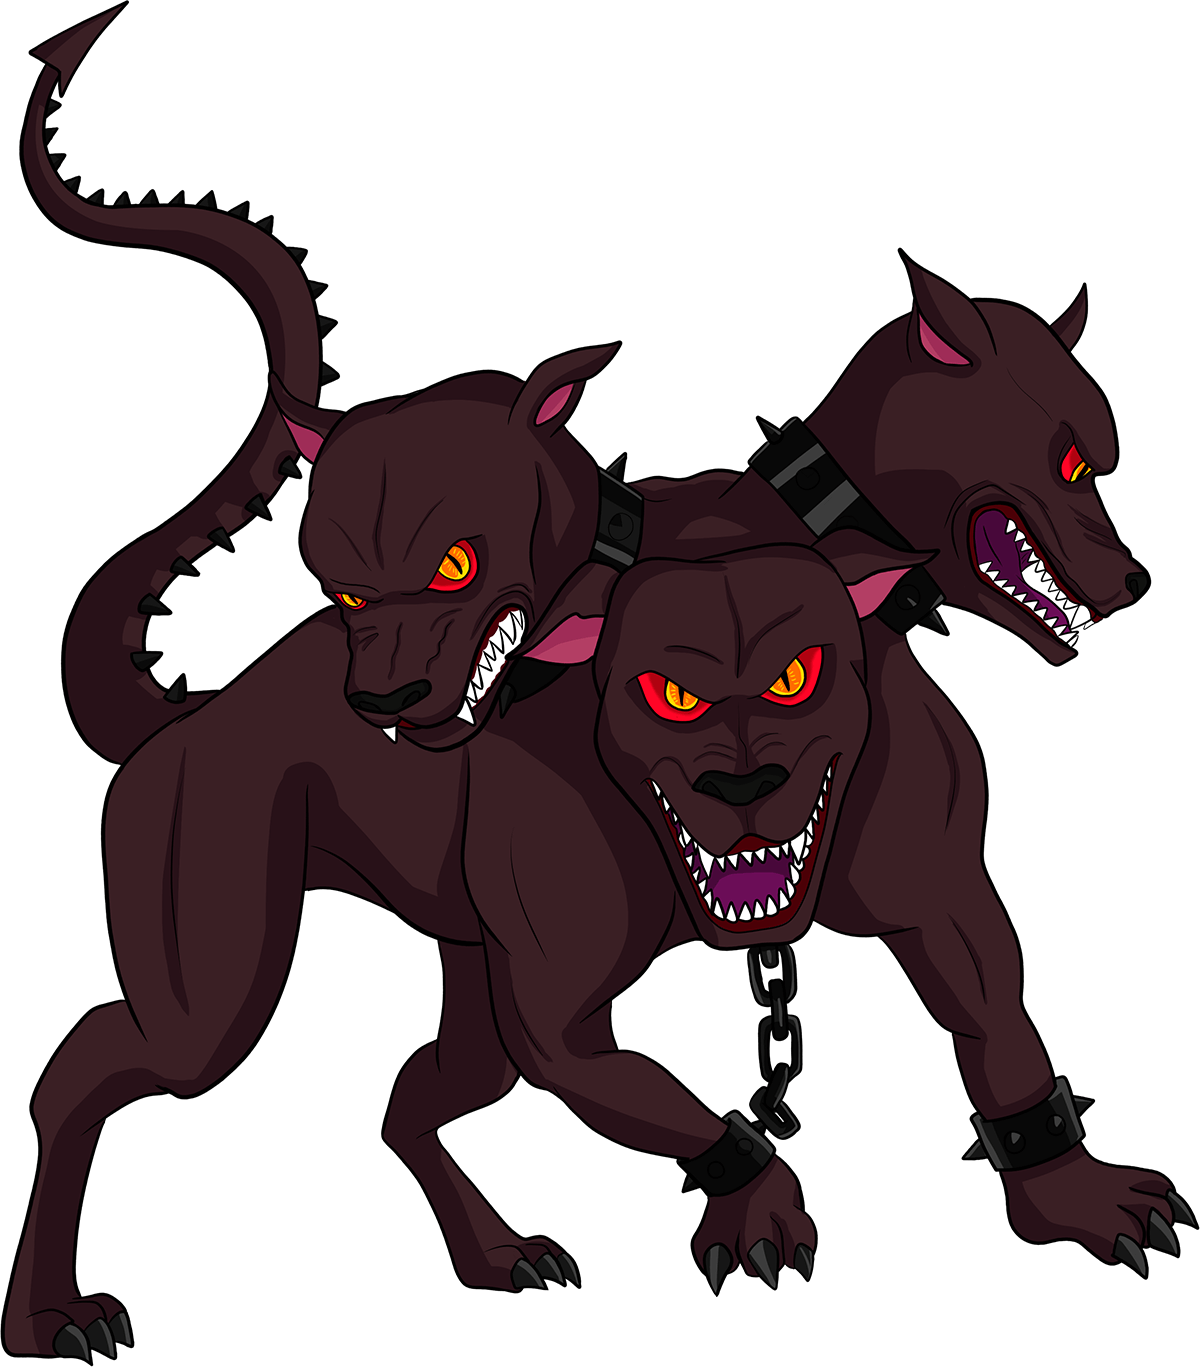 A Cartoon Of A Dog With Chains And A Chain Around It